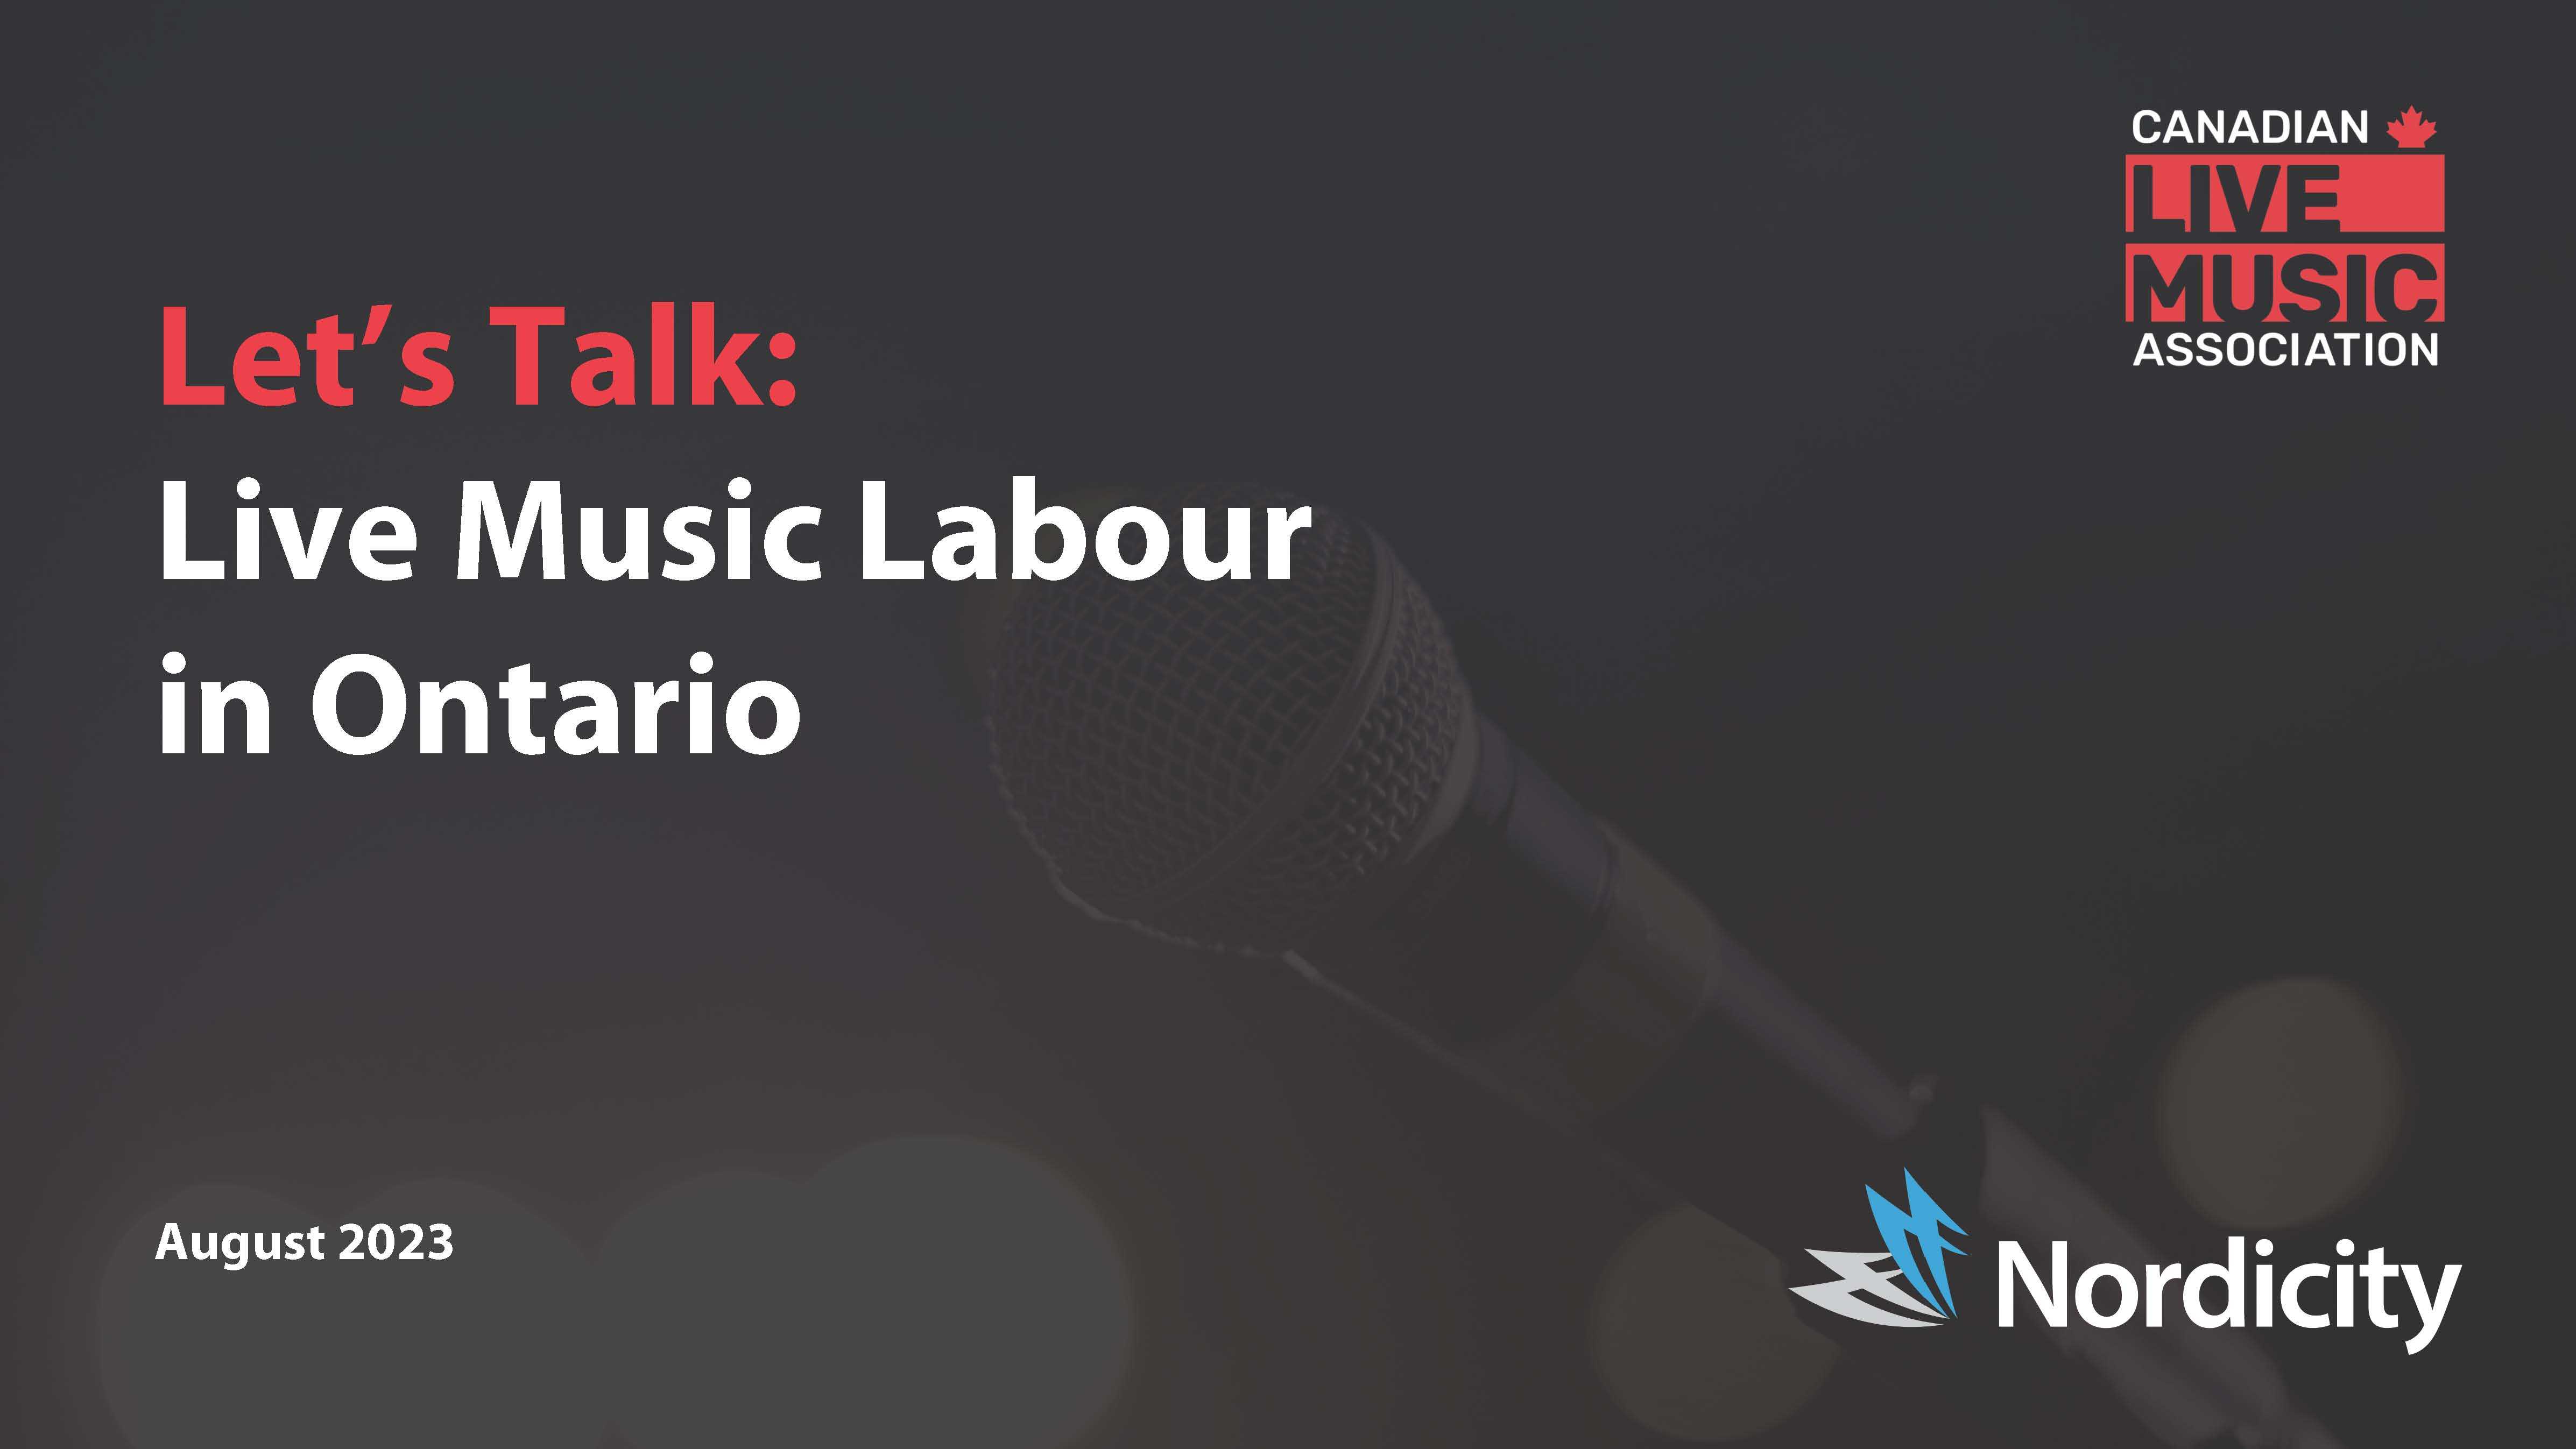 Let’s Talk: Live Music Labour in Ontario